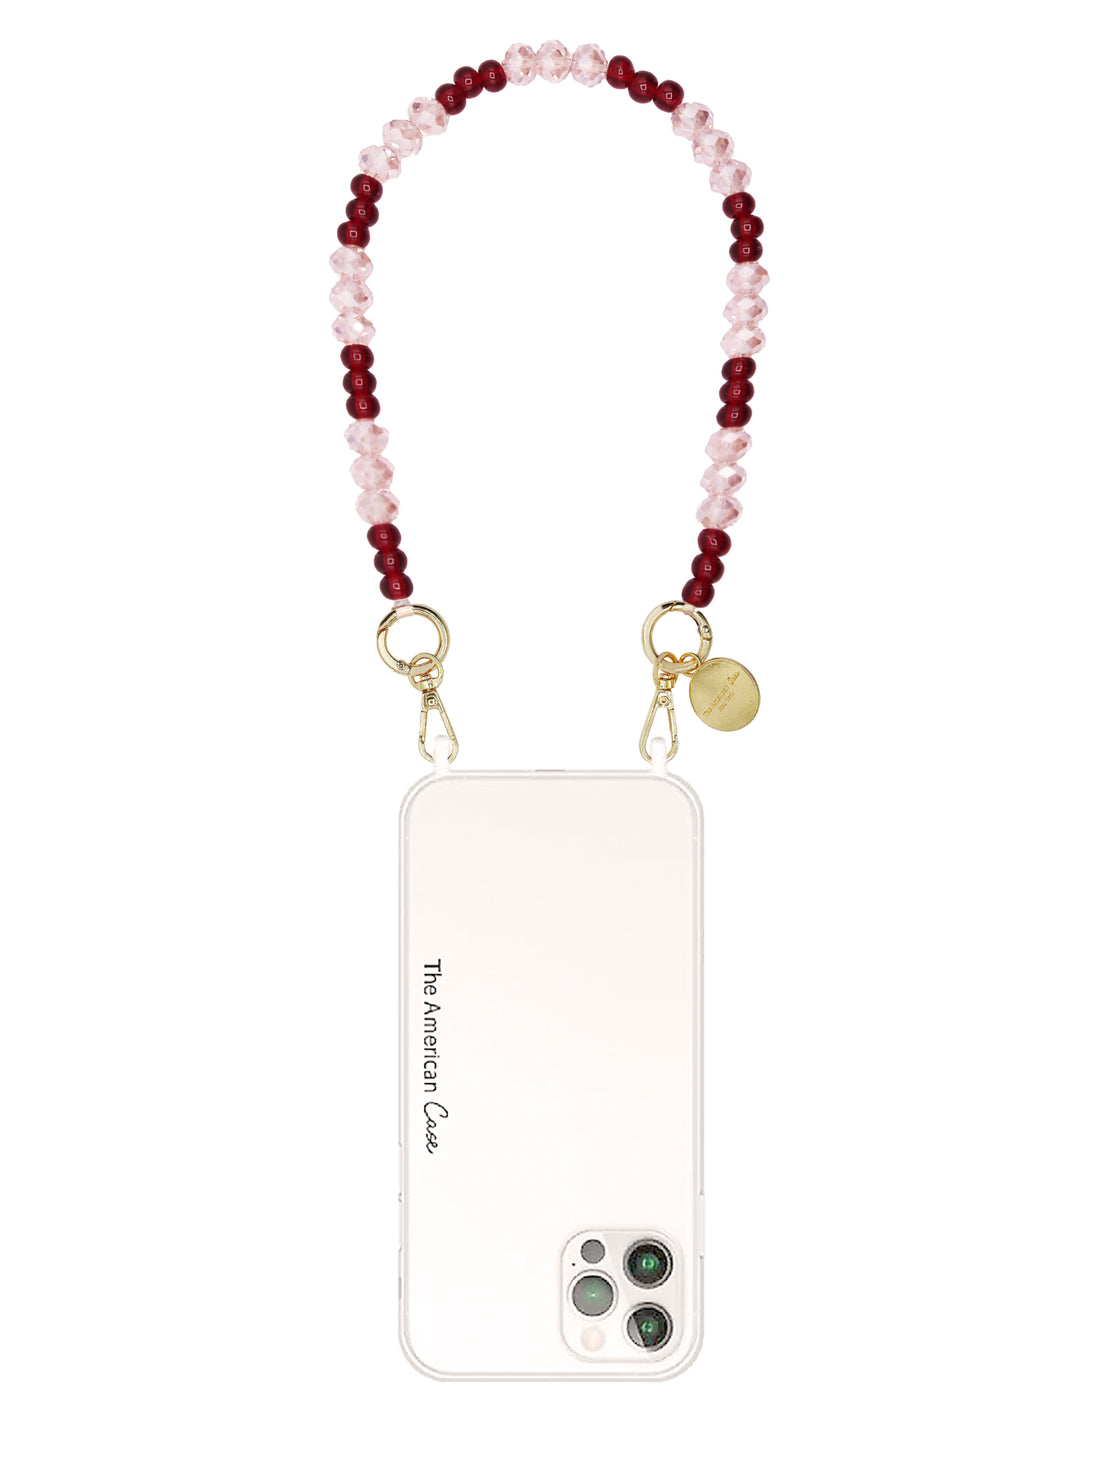 Margo - Crystal and Red Bead Bracelet Phone Chain With Golden Carabiners